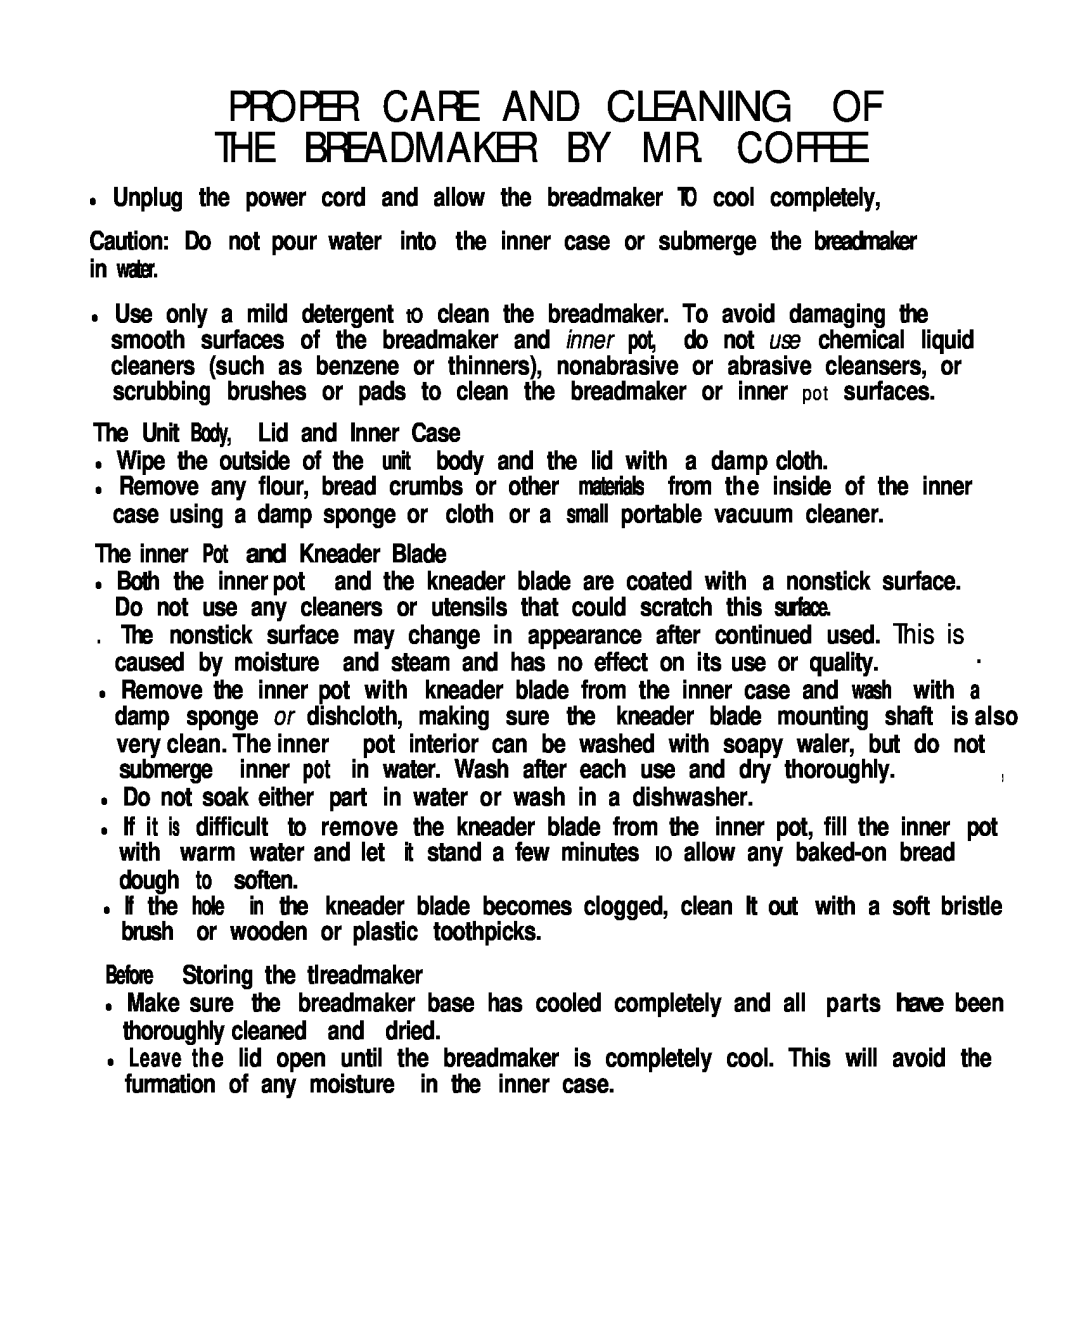 Mr. Coffee BMR 200 instruction manual Proper Care And Cleaning Of The Breadmaker By Mr. Coffee 